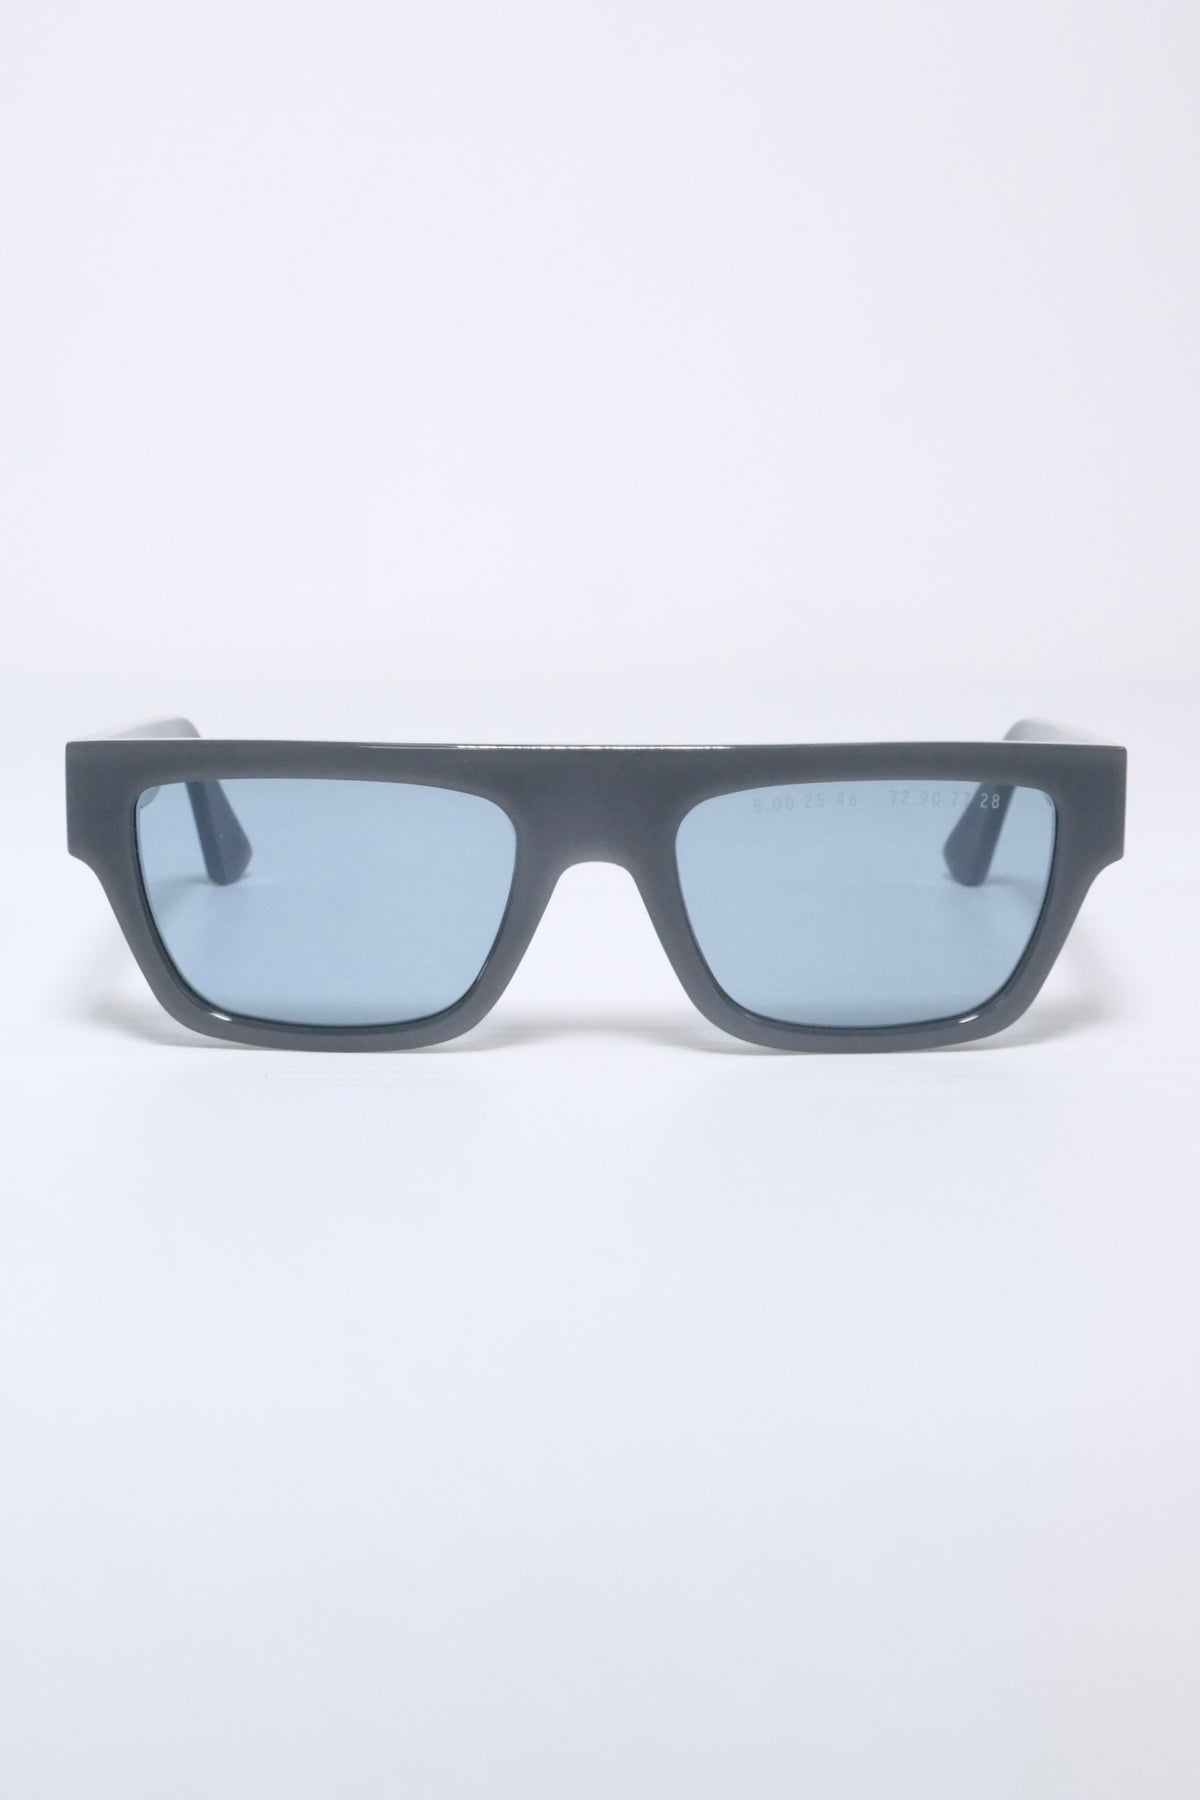 Clean Waves Type 01 Low Sunglasses - Grey